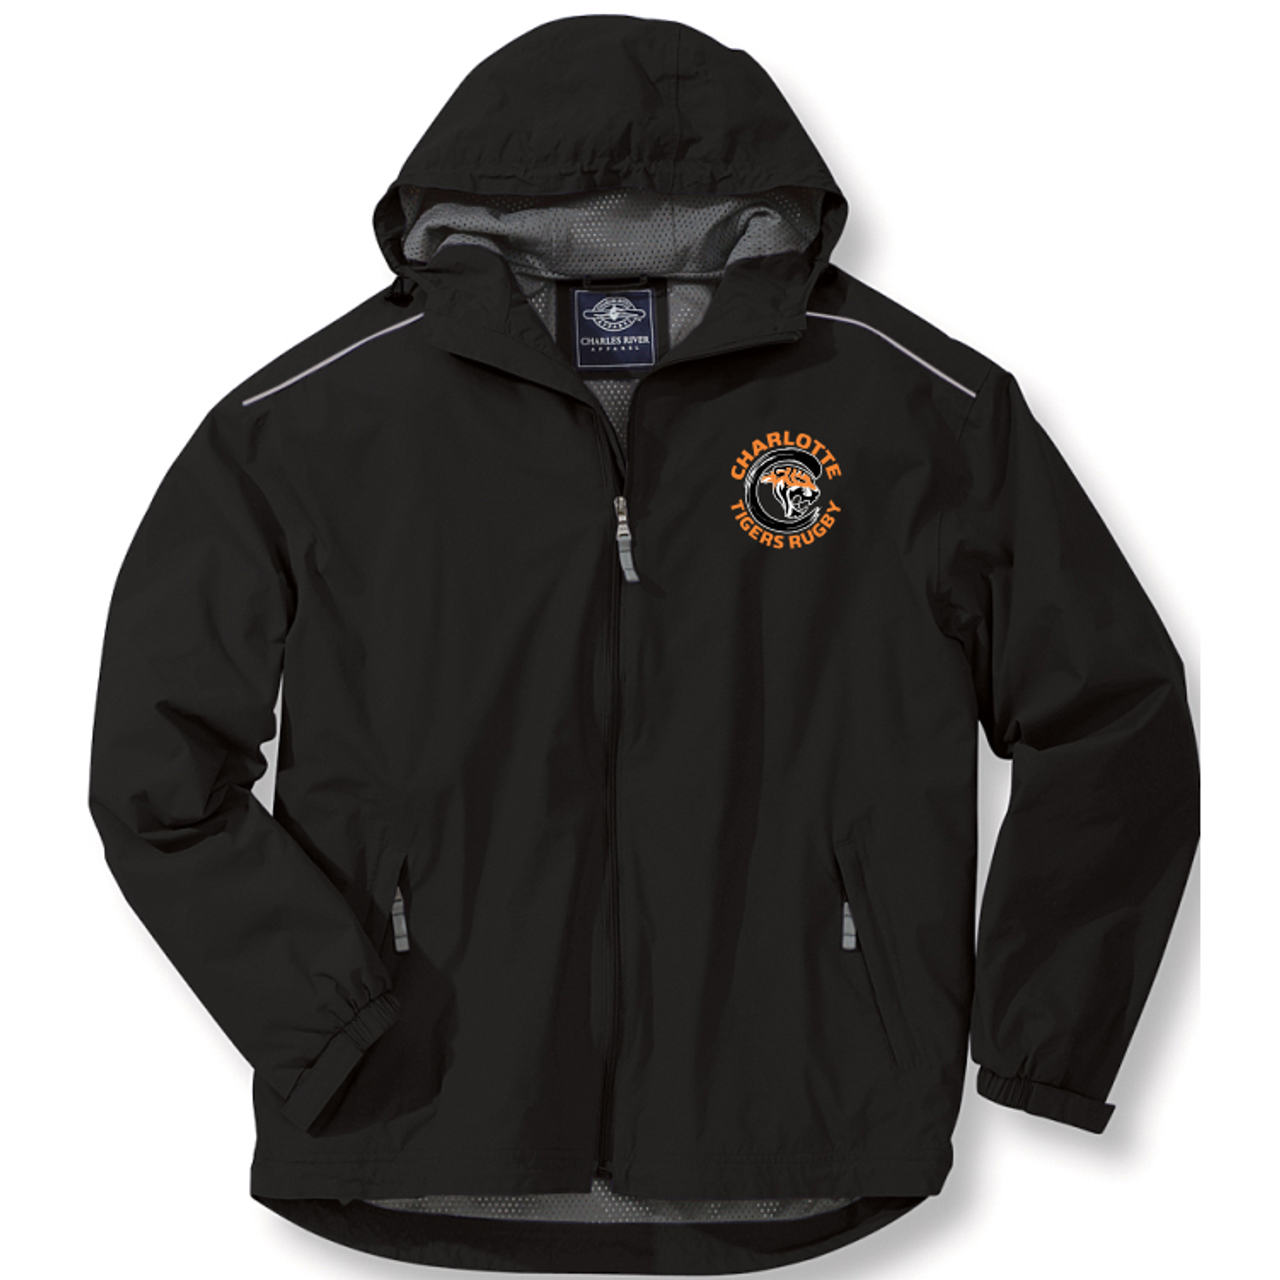 Jacket with the Tigers logo.